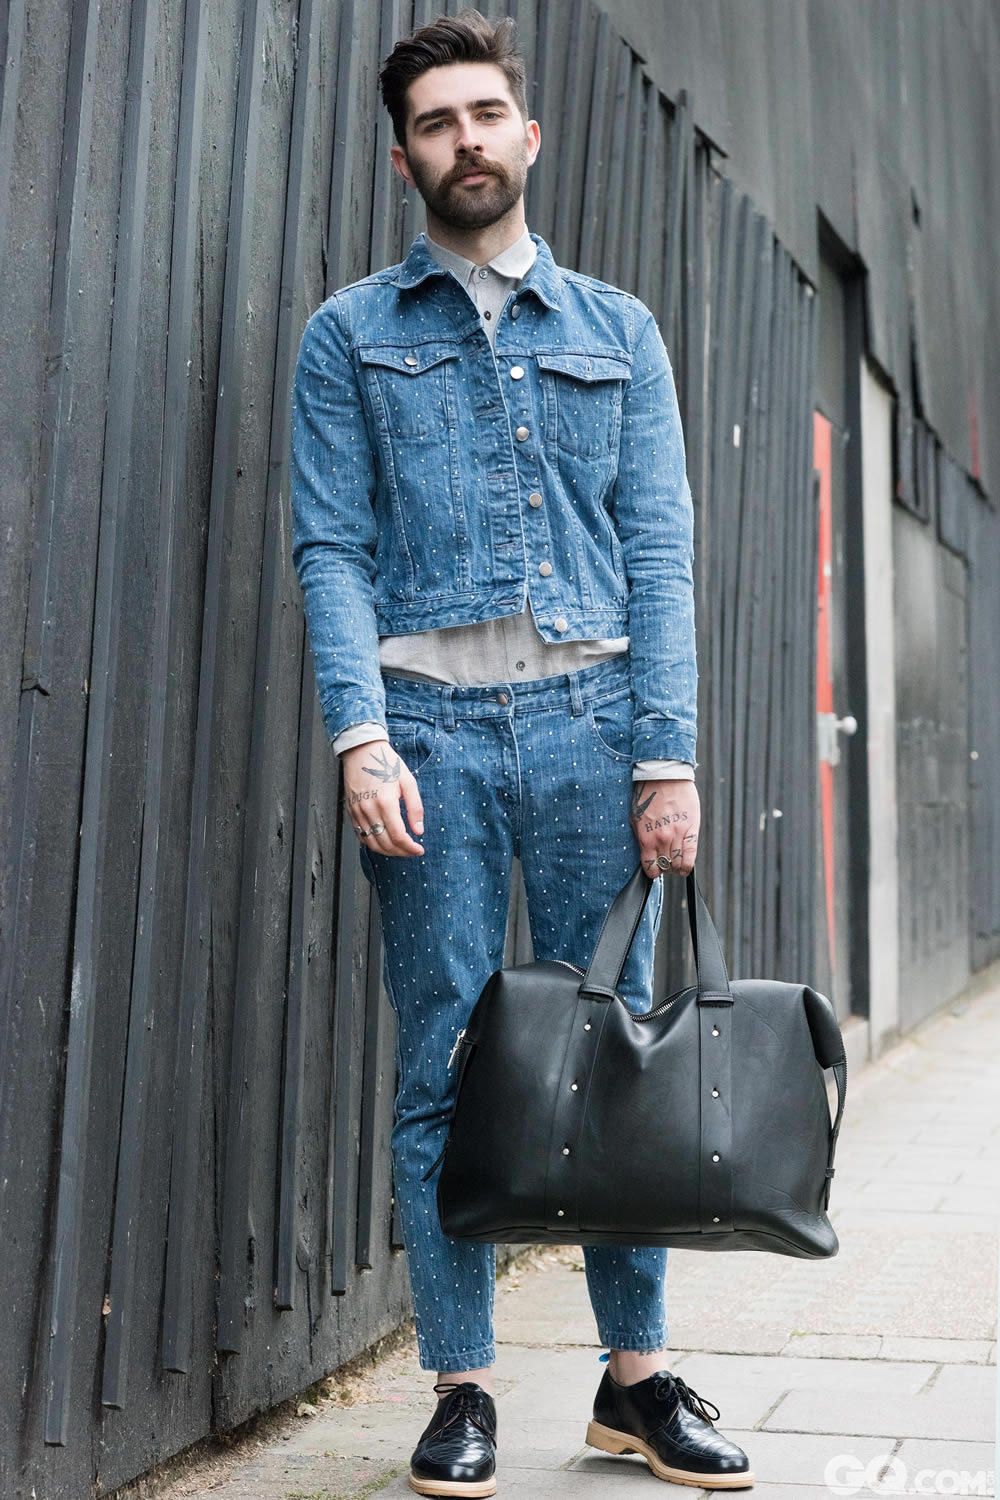 Chris
All Look: YMC
Bag: Zara

Inspiration: For today, I wanted to try something different. Usually I go for something Scandinavian and toned down. This is a little different. Plus I like denim and polka dots. 
（今天我想尝试一些不一样的东西，通常我的风格比较斯堪的纳维亚和淡色感，但这次有些不同，顺便提一下，我喜欢丹宁和波点元素）